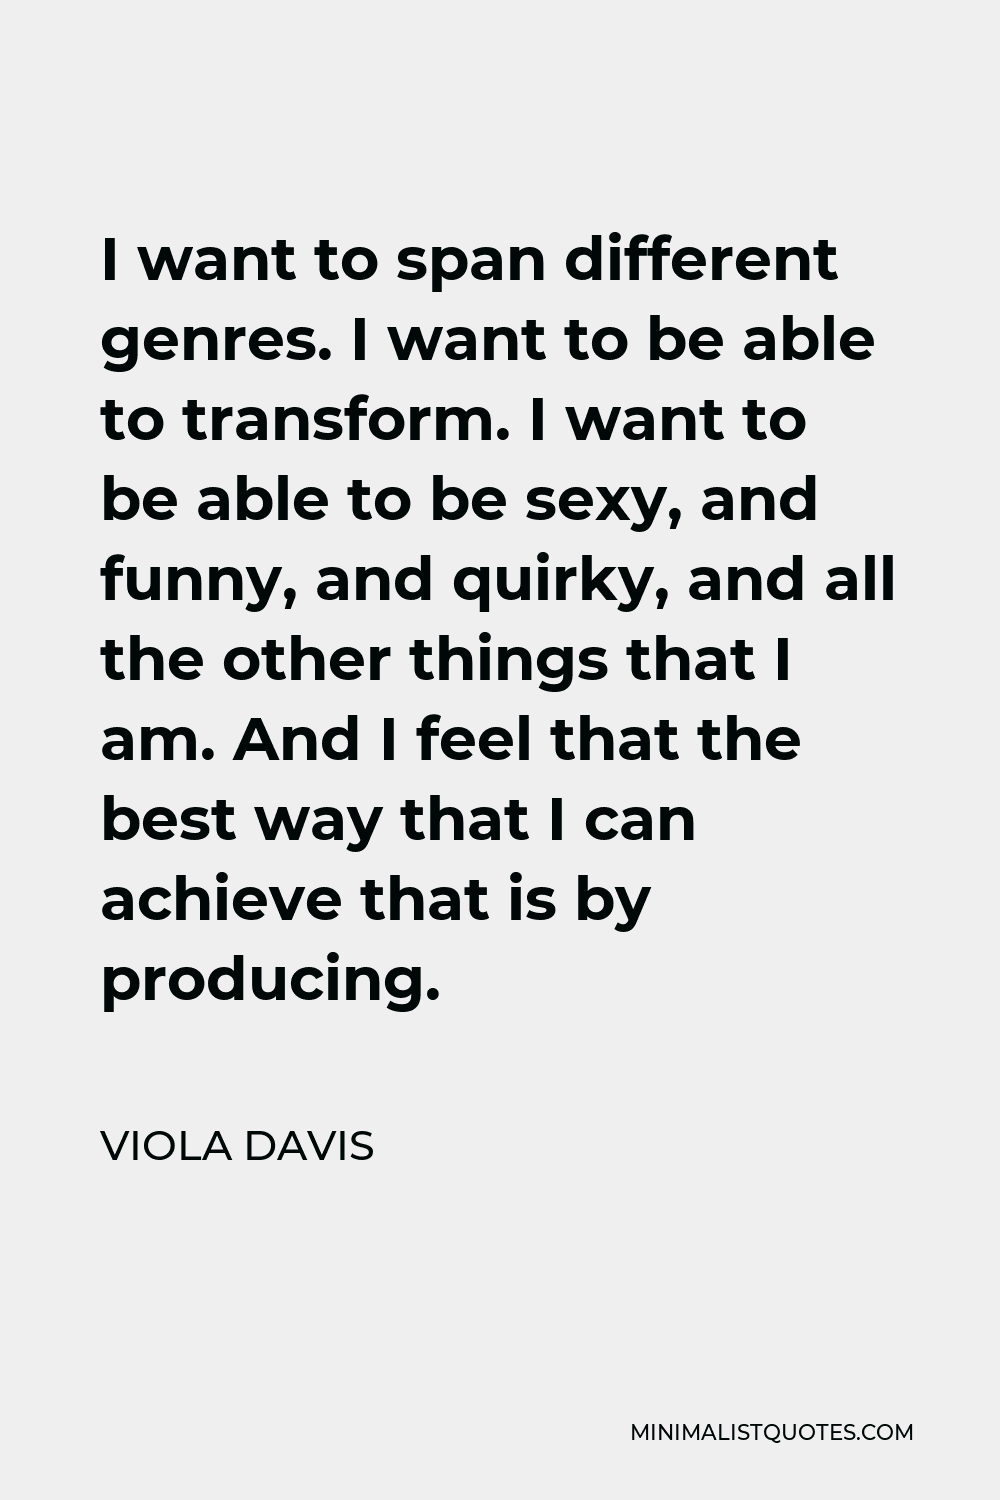 Viola Davis Quote - I want to span different genres. I want to be able to transform. I want to be able to be sexy, and funny, and quirky, and all the other things that I am. And I feel that the best way that I can achieve that is by producing.